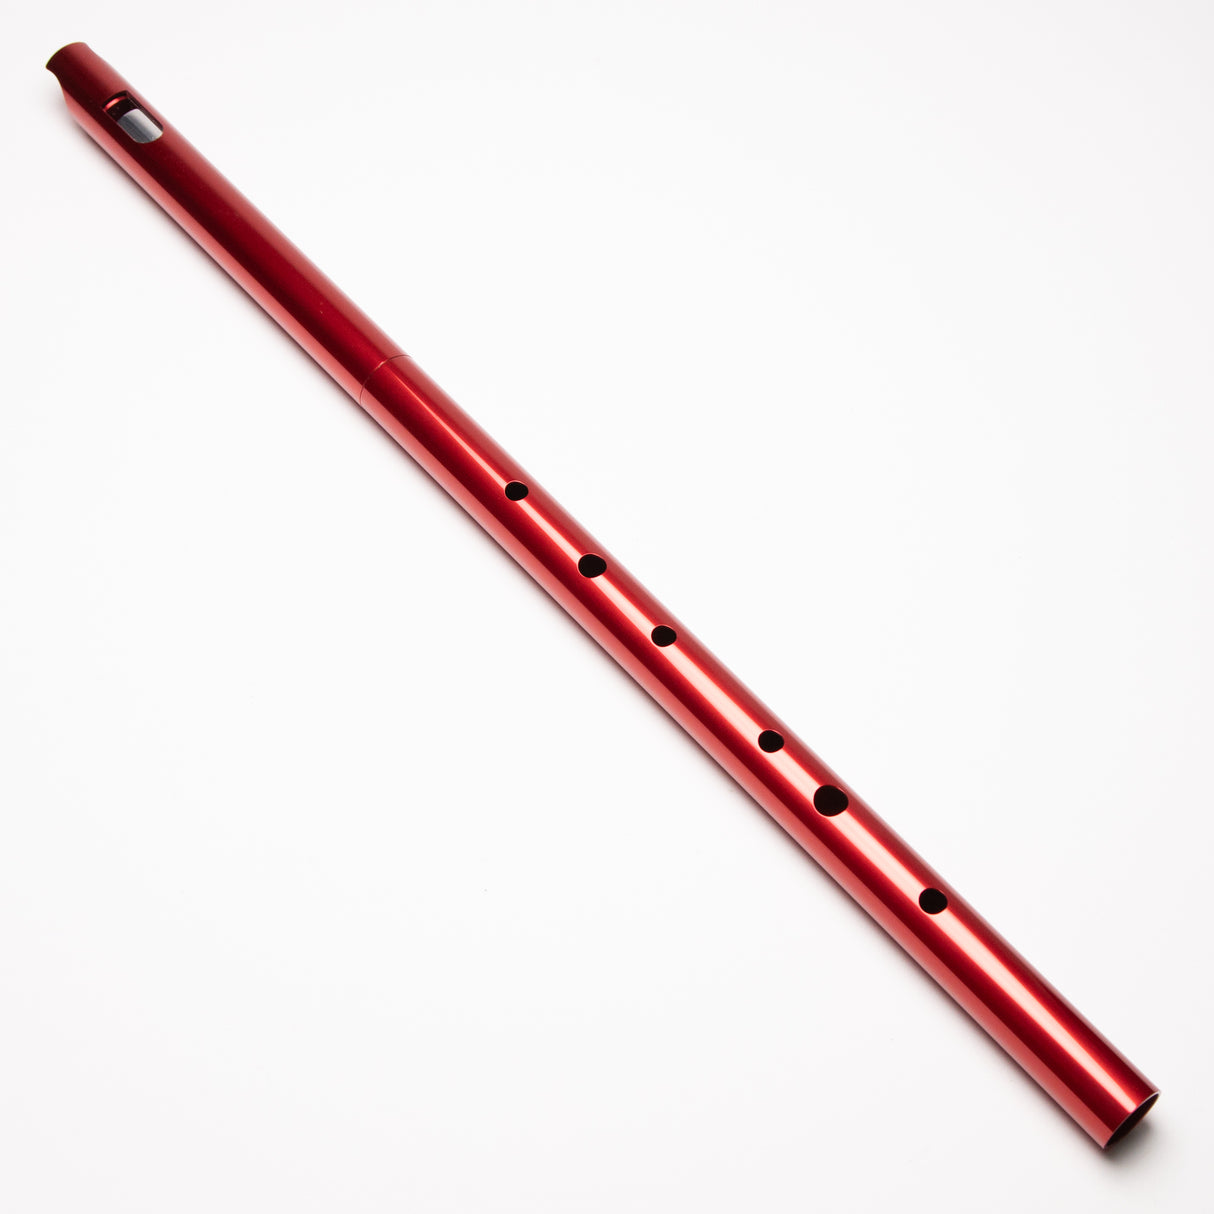 MK Pro Low D in Red